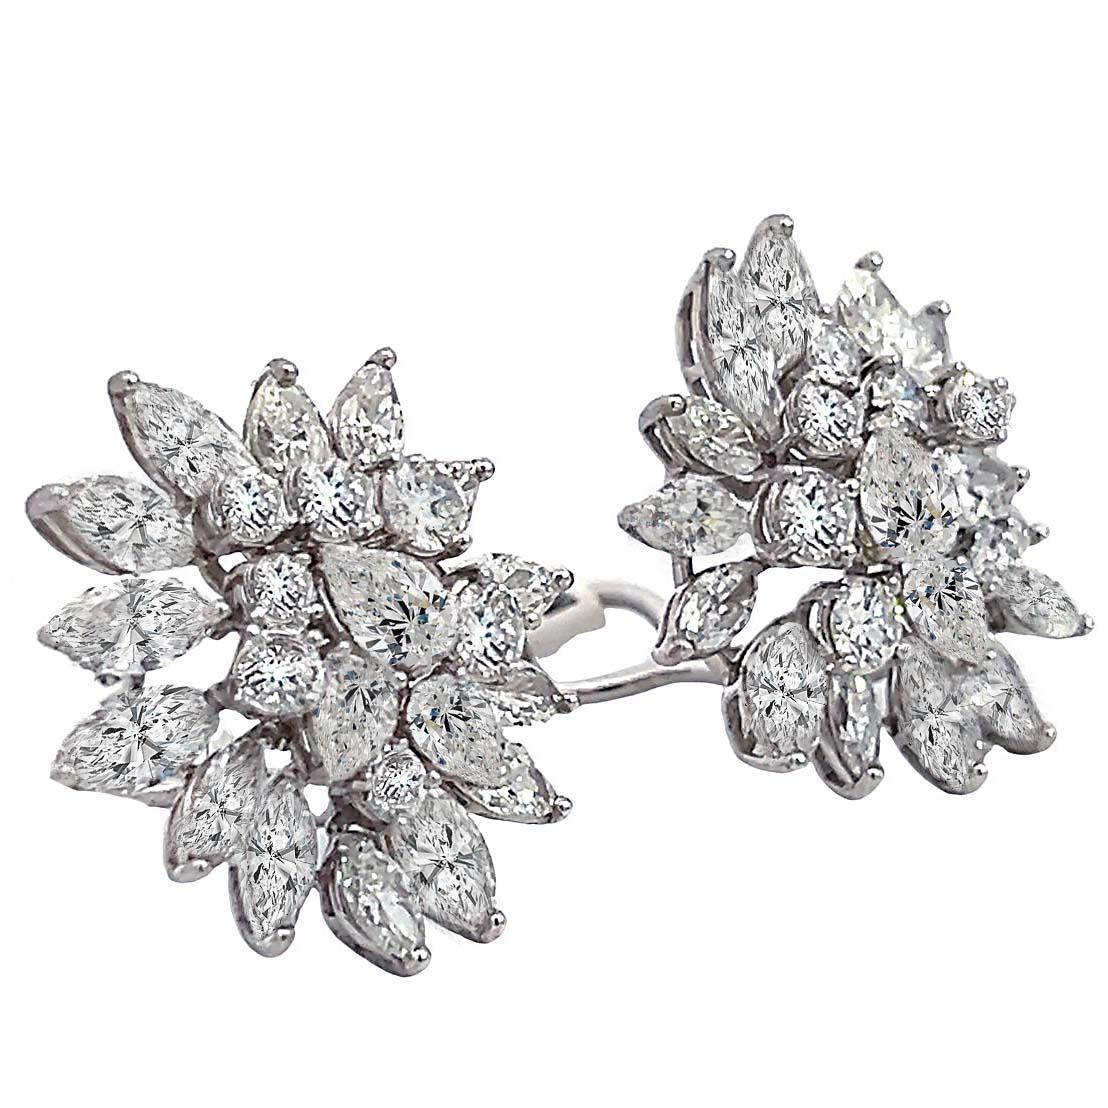 Impressive diamond earrings boast a total of 48 diamonds with an estimated weight of 9.50 - 10 carats. The diamonds come in various shapes including round, marquise, and pear shapes, adding to the allure of the design.

With a diameter of 1 inch,